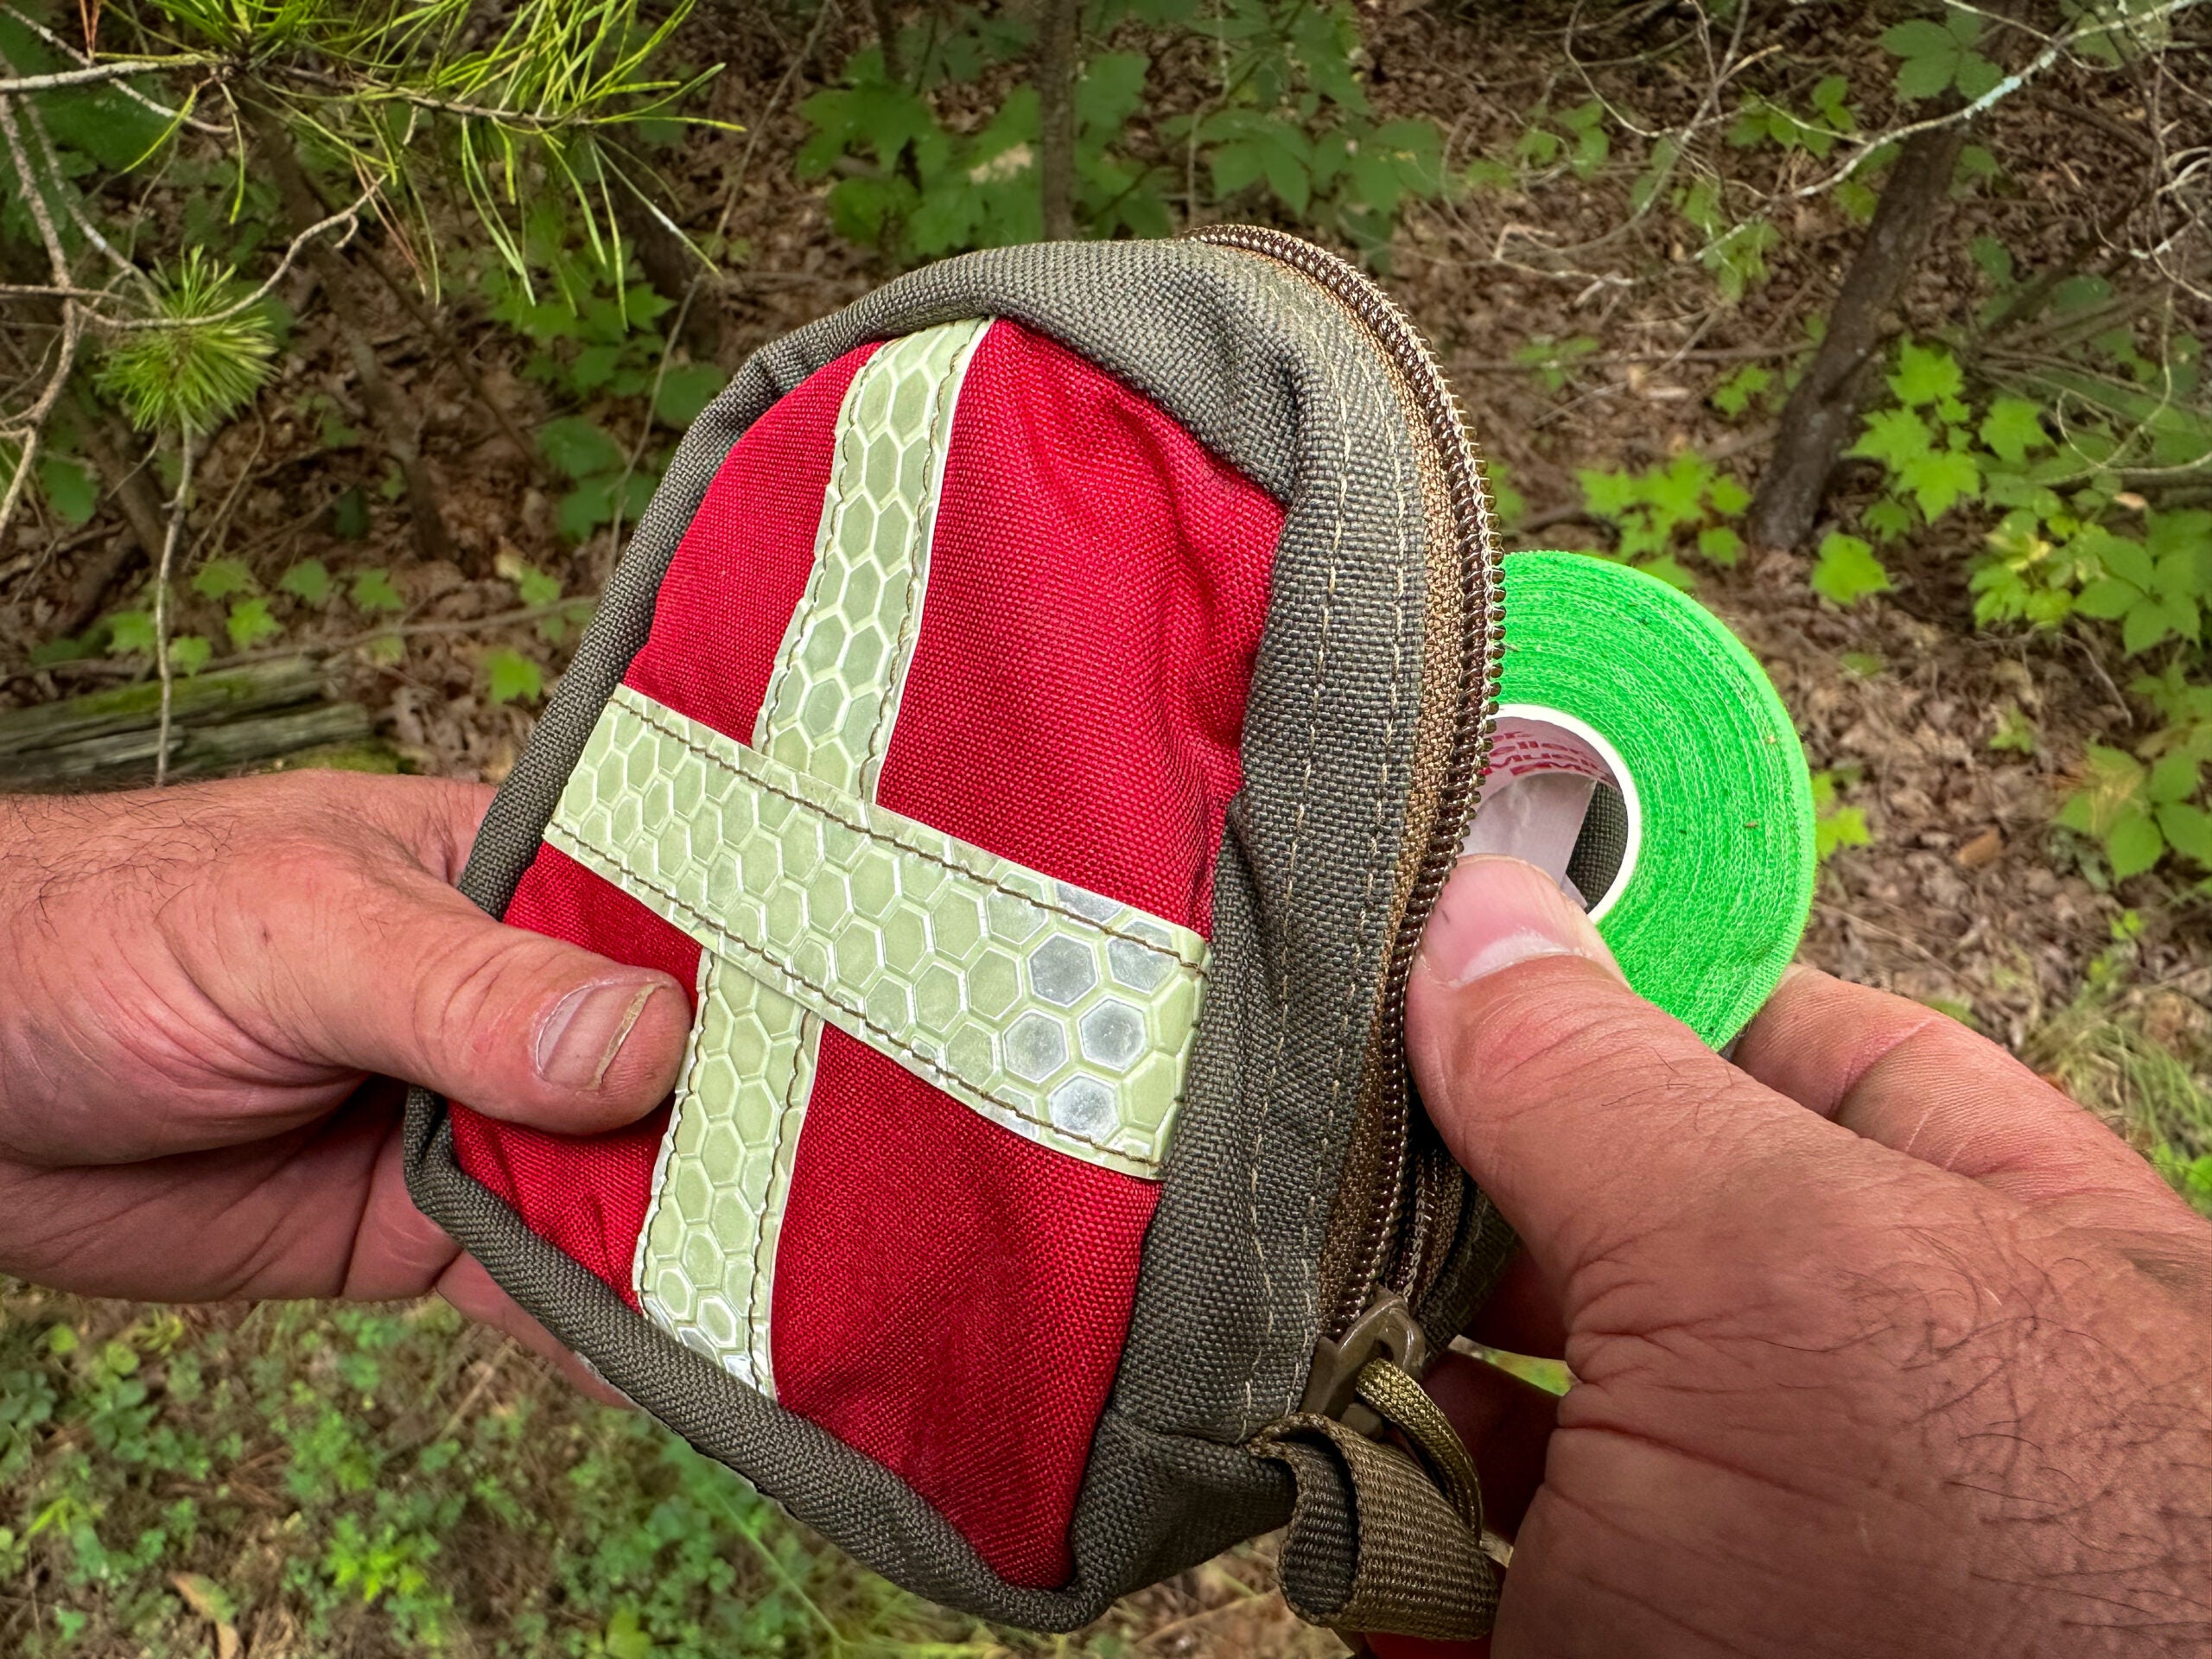 A small first-aid kit in a red bag with a white cross on it, and a roll of green tape.